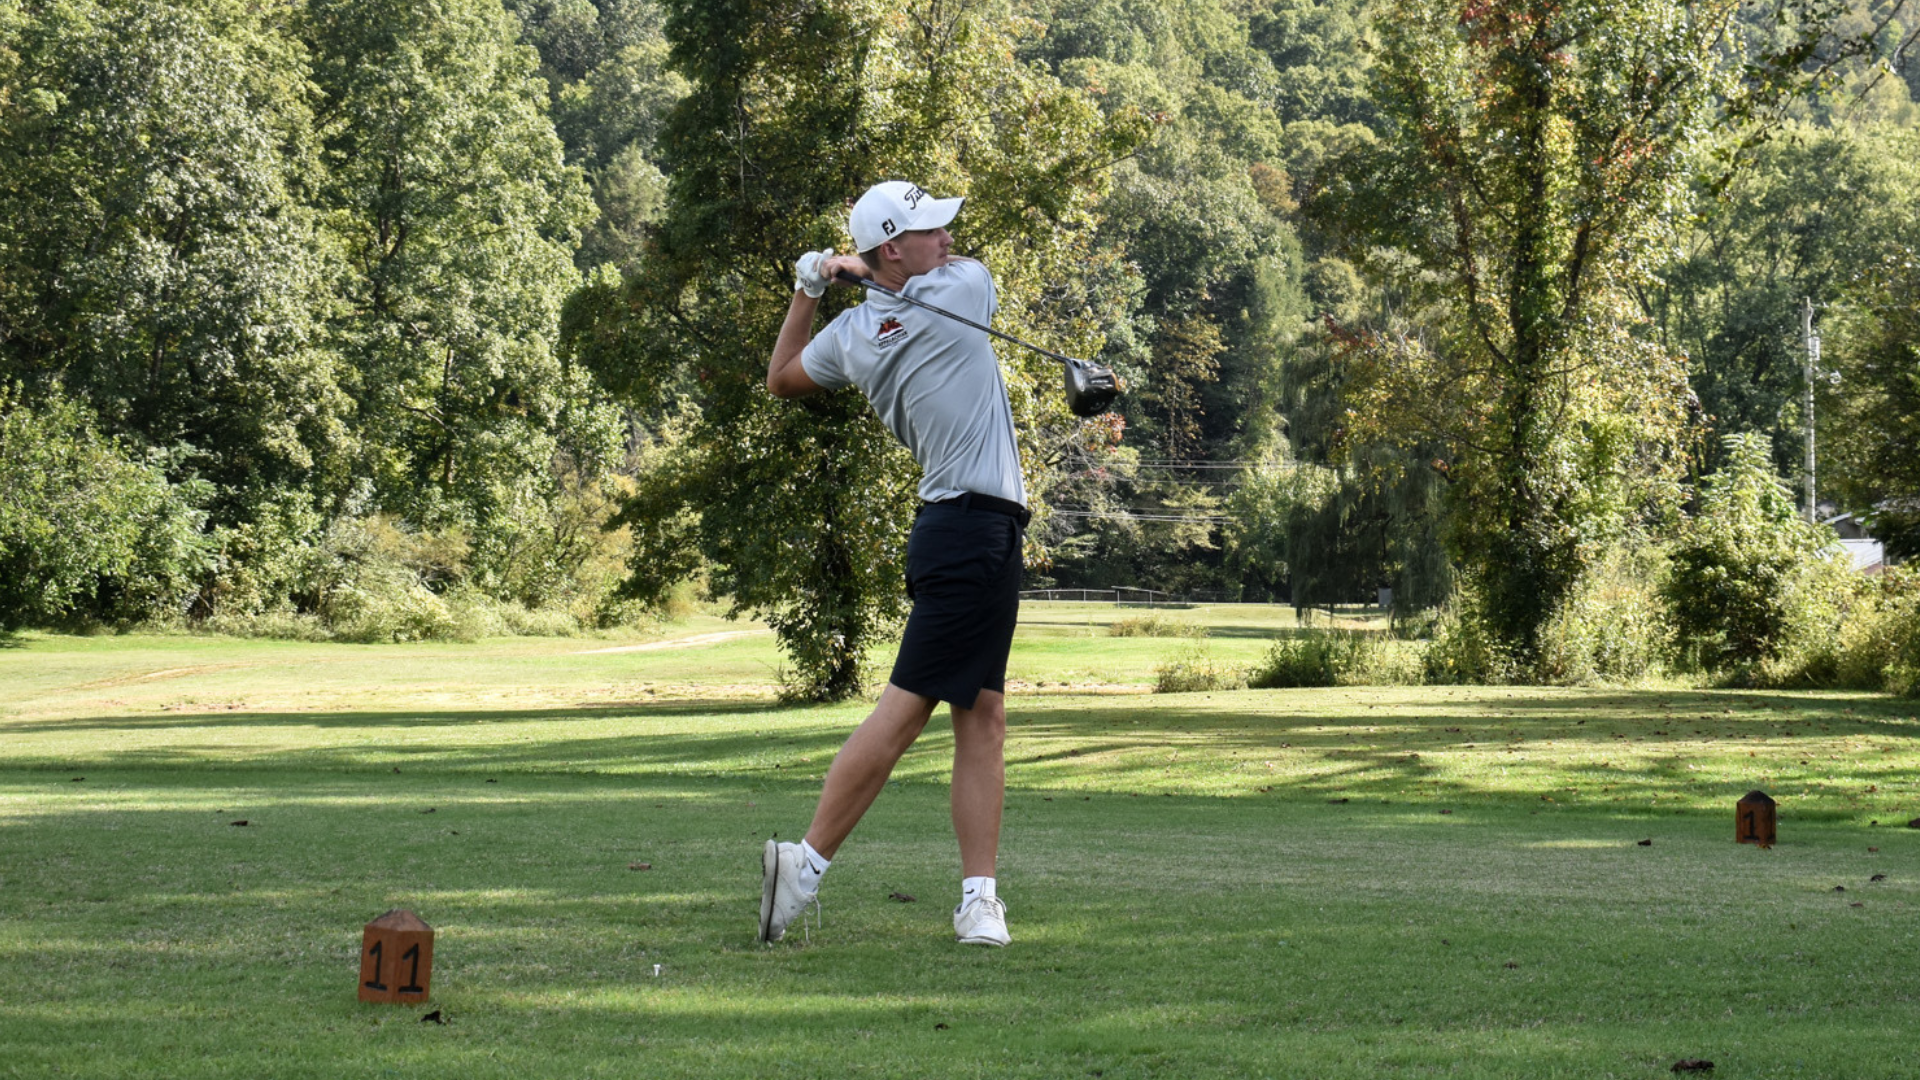 Union men’s golf recap from the Indy at Gibson Bay